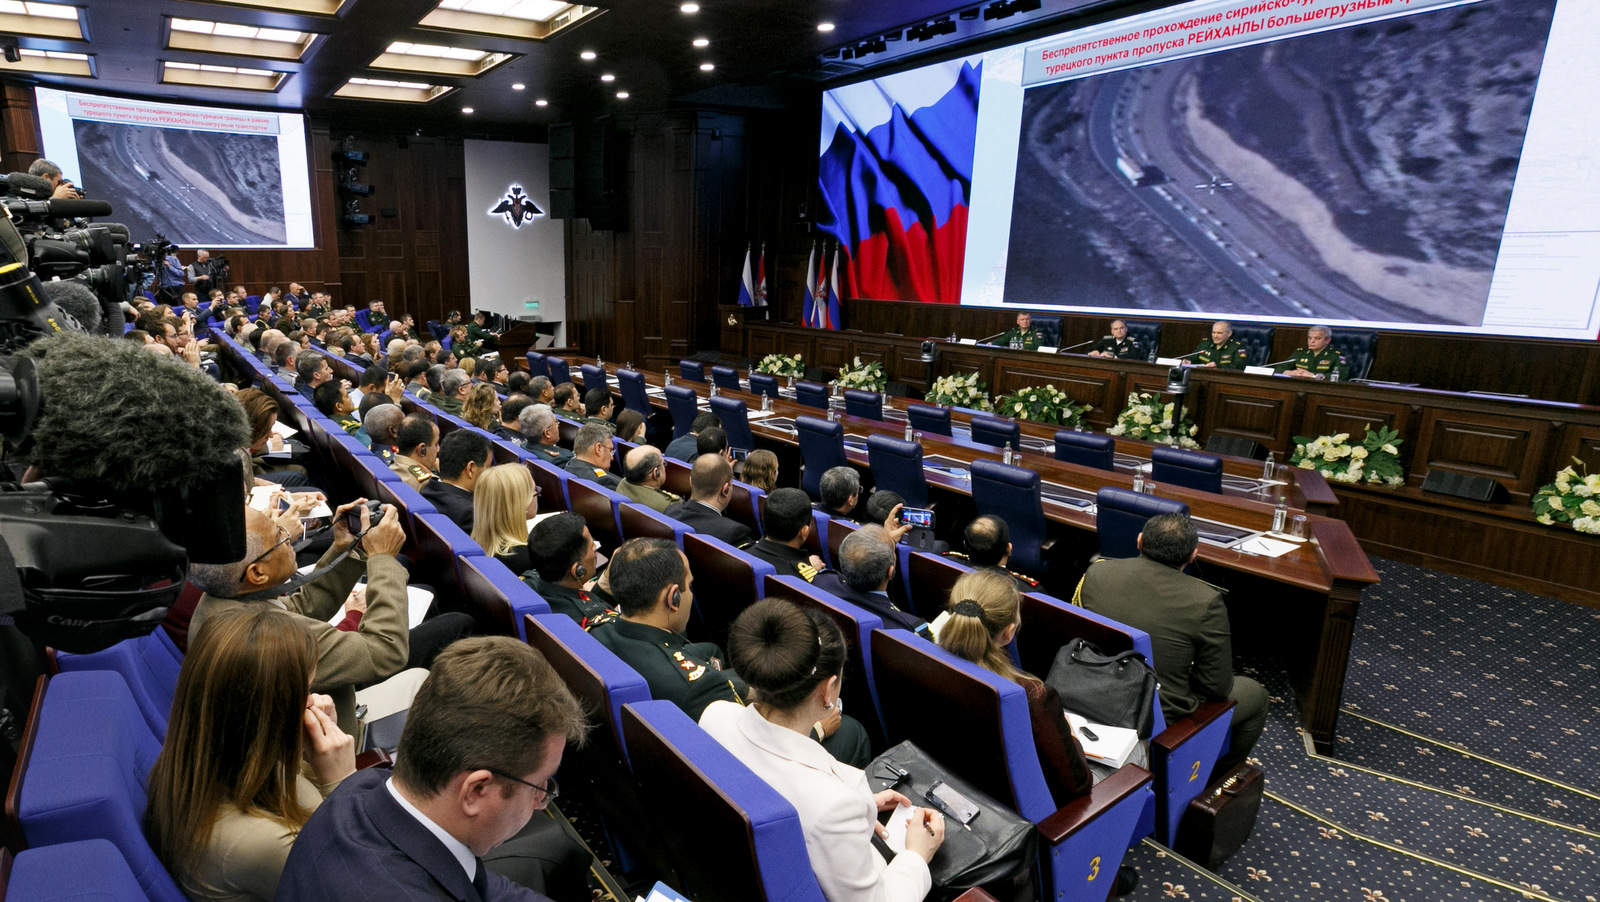 Russian top military officials speak to the media in front of aerial images of oil trucks near Turkey’s border with Syria at a briefing in Moscow, Russia, Dec. 2, 2015. (Vadim Savitsky/ Russian Defense Ministry Press Service via AP)